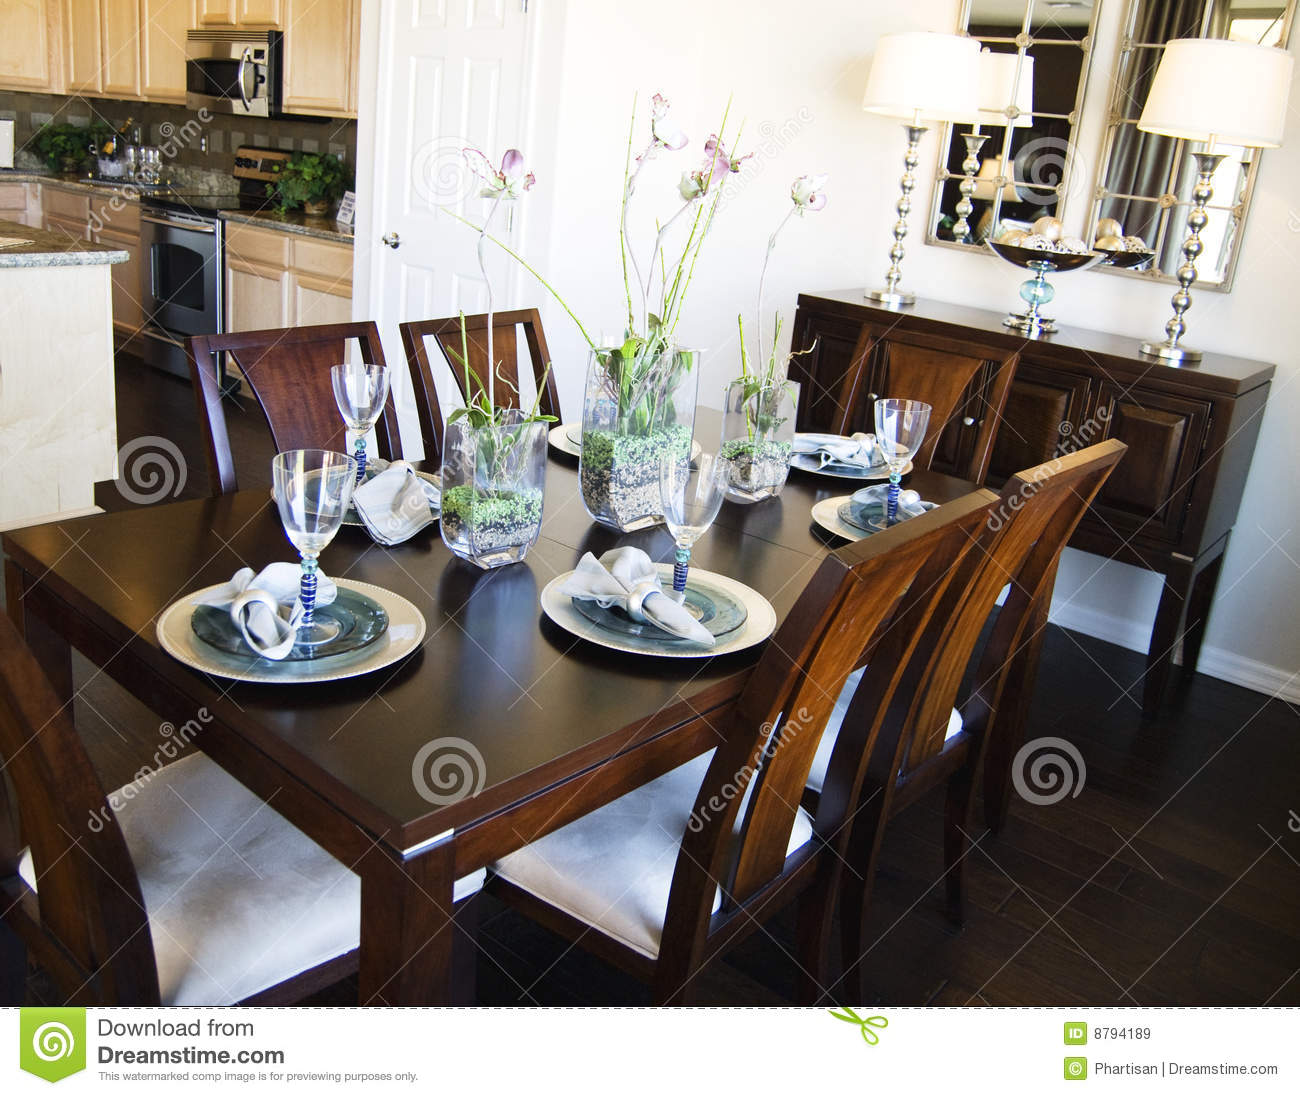 Elegant Dining Table Area Royalty Free Stock Images   Image  8794189